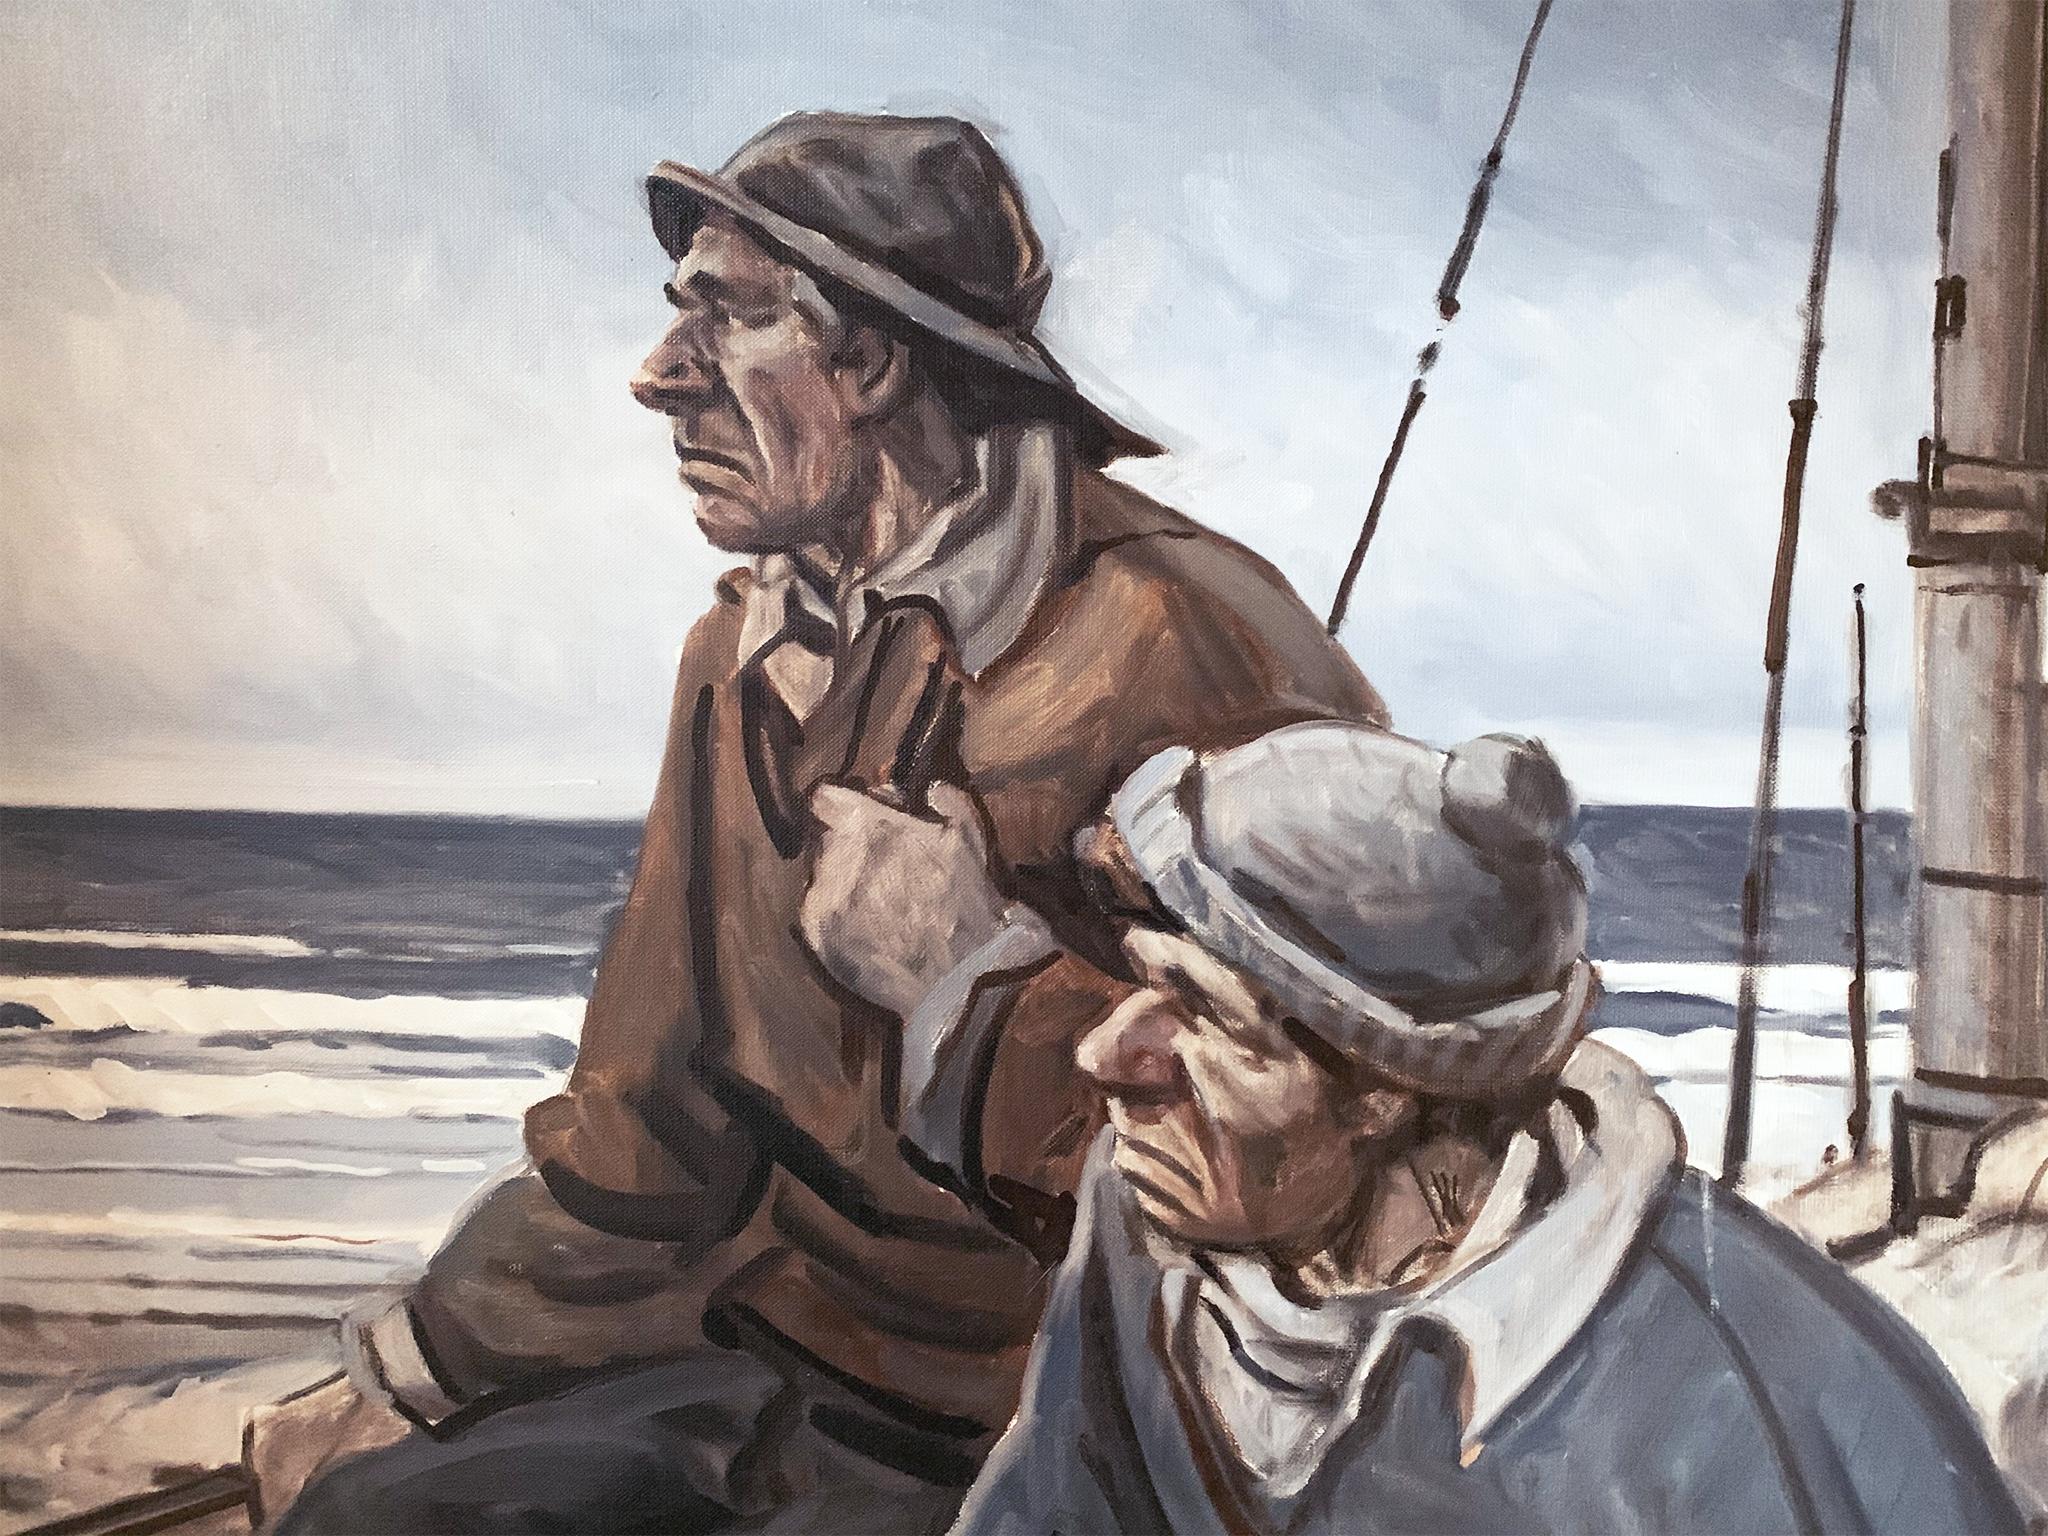 A maritime portrait of two fishermen staring off into the distance. A palette of muted grays, blues, and pale sepia, applied in thin layers, evokes a wintry scene. It's a beautifully quiet painting with a wistful atmosphere.

Oil on canvas.